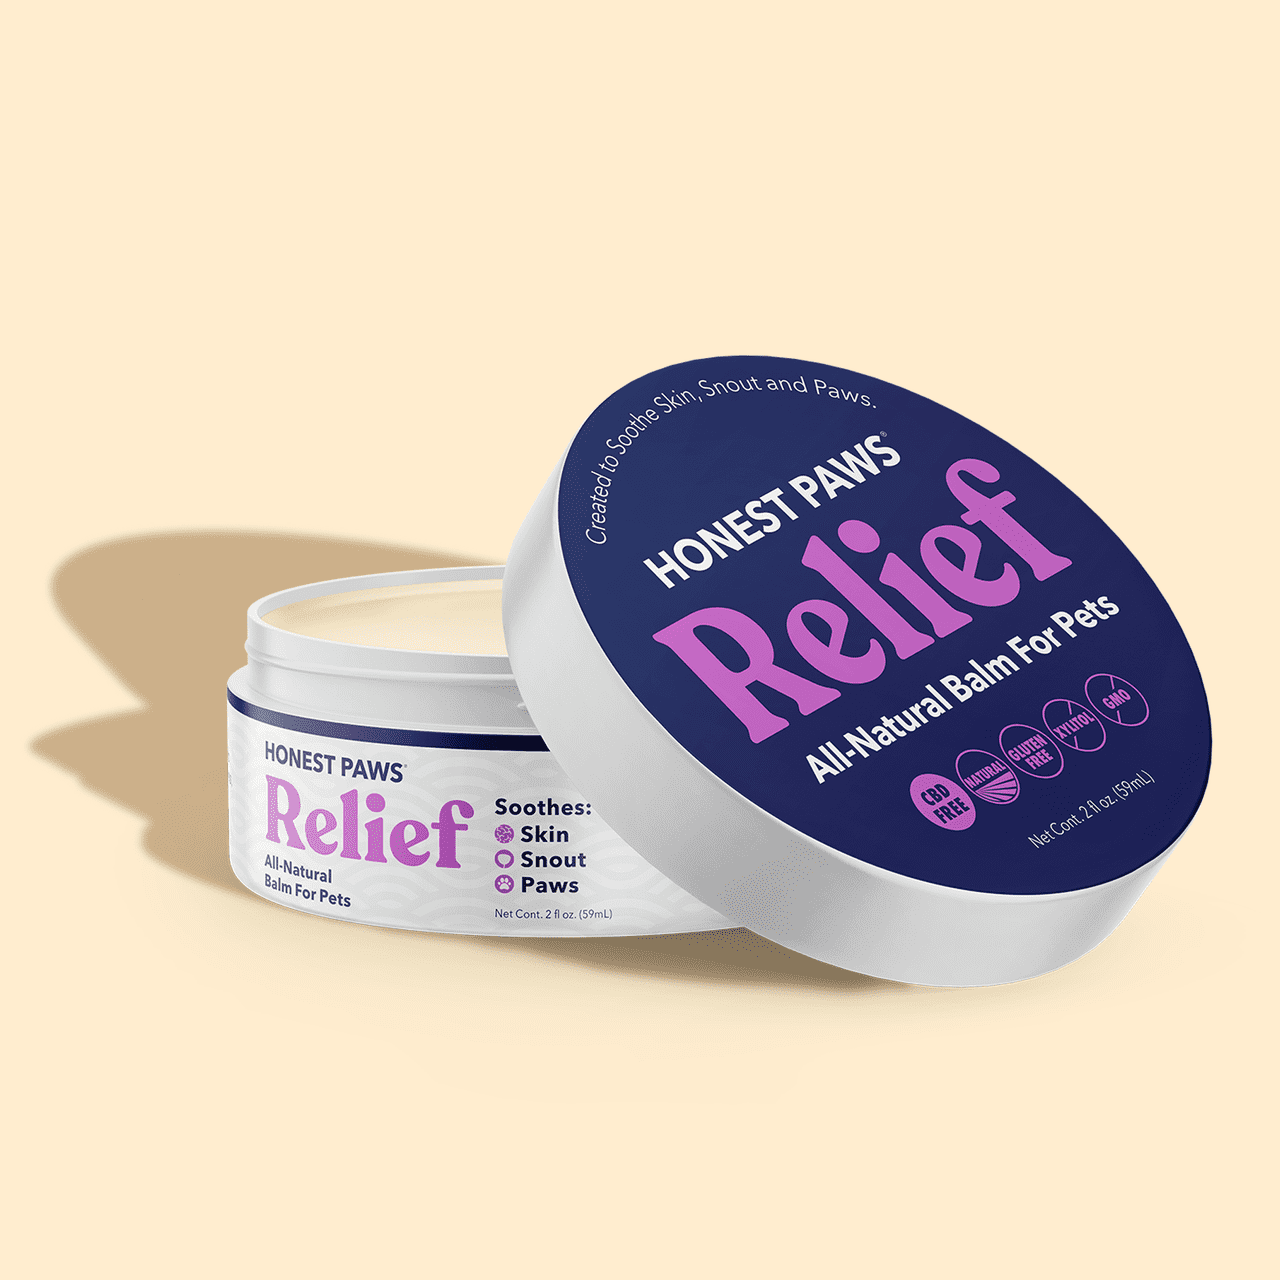 Honest Paws Relief Paw Balm